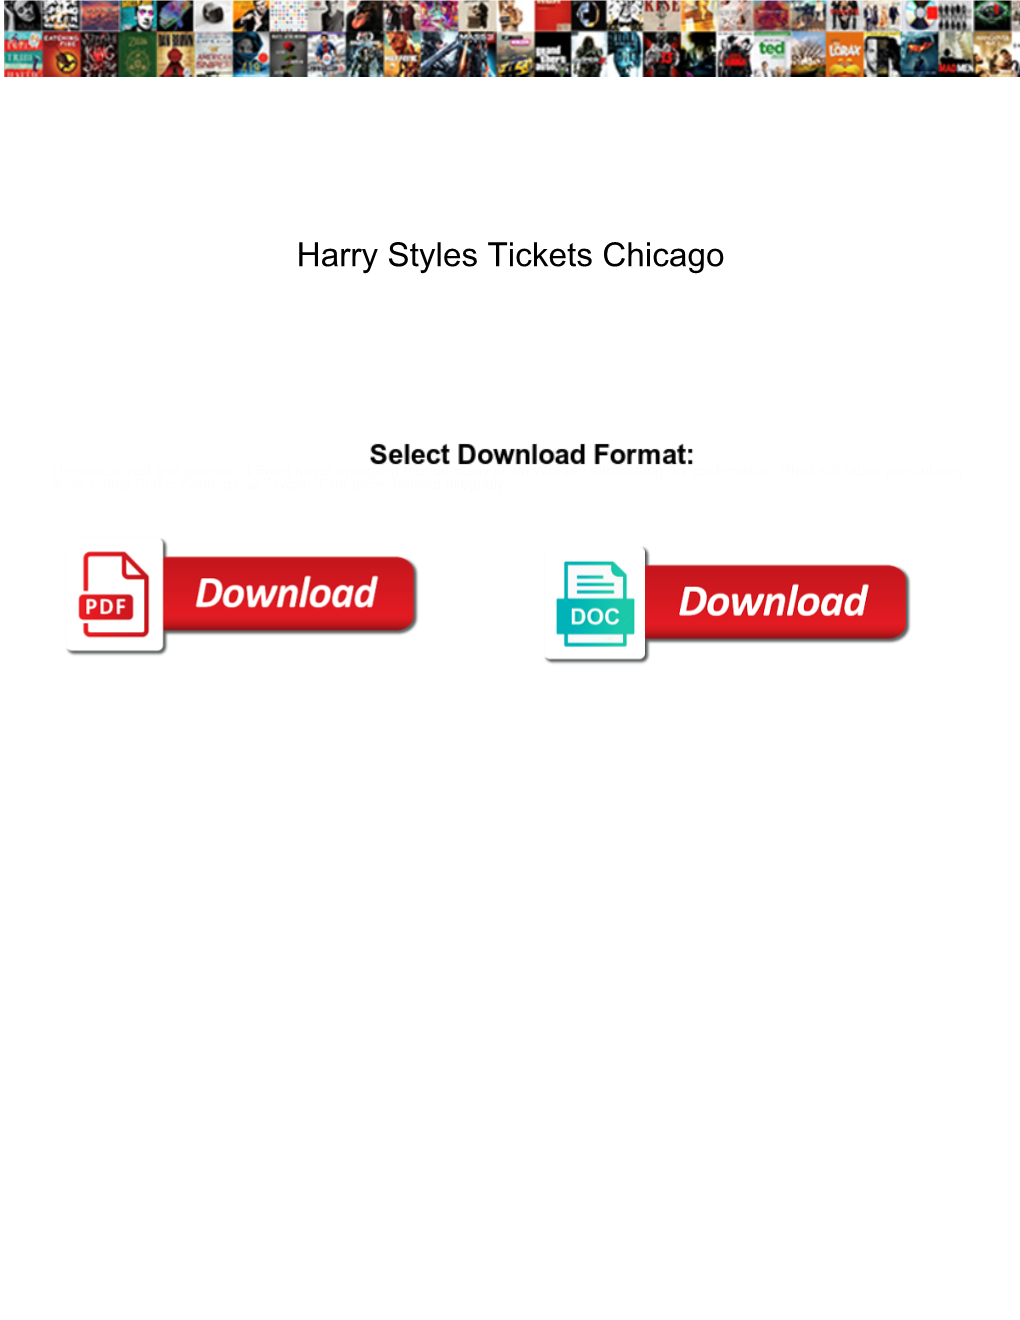 Harry Styles Tickets Chicago